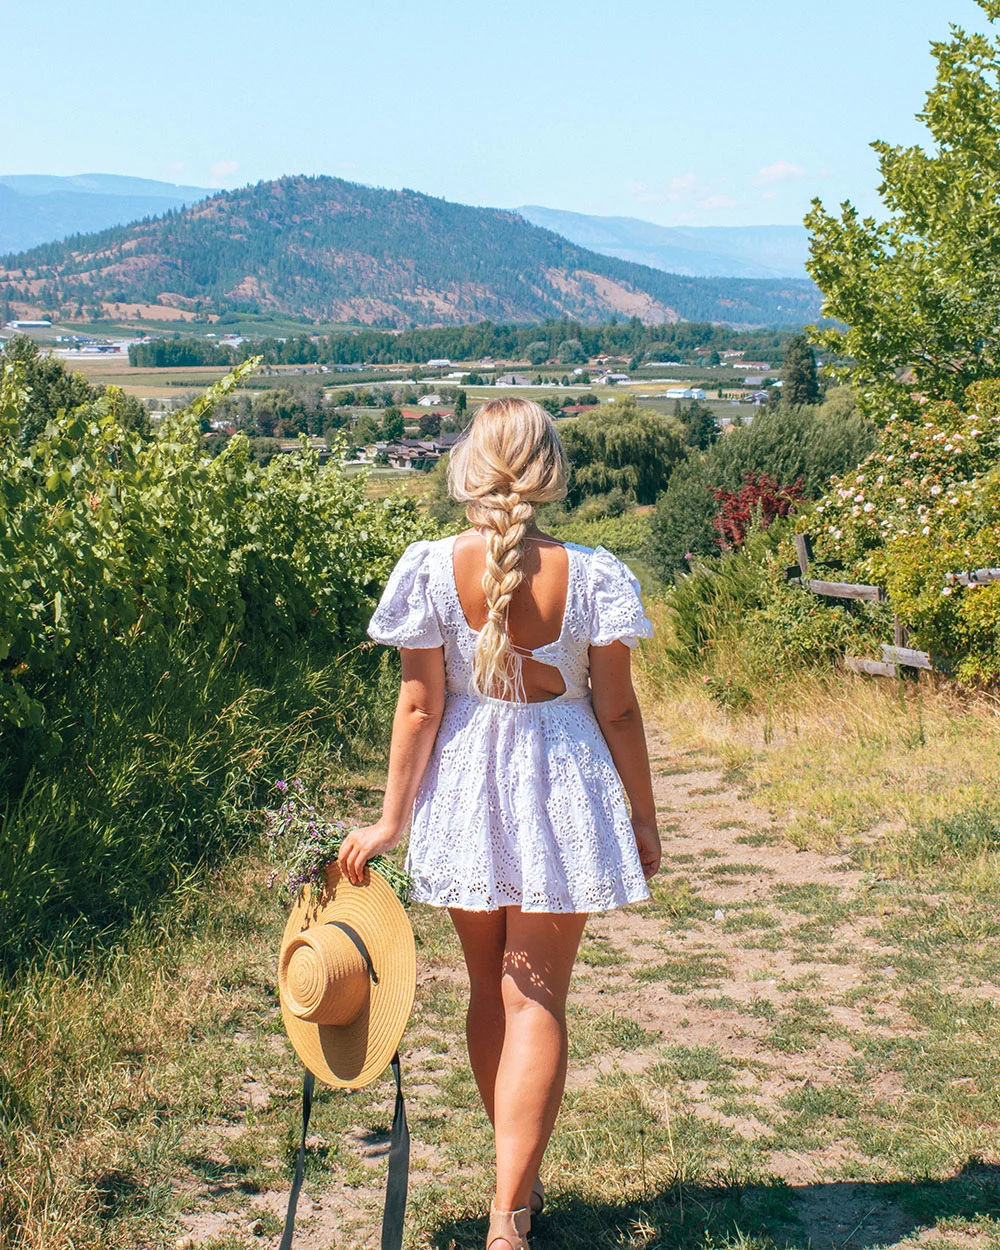 If you're heading to the Okanagan soon and planning on spending time in Kelowna, you don't want to miss this guide to the best wineries in Kelowna! From organic wineries to wineries with the best view, this guide will help you plan your visit to Kelowna’s incredible wine region. Pictured here: Ancient Hill Winery